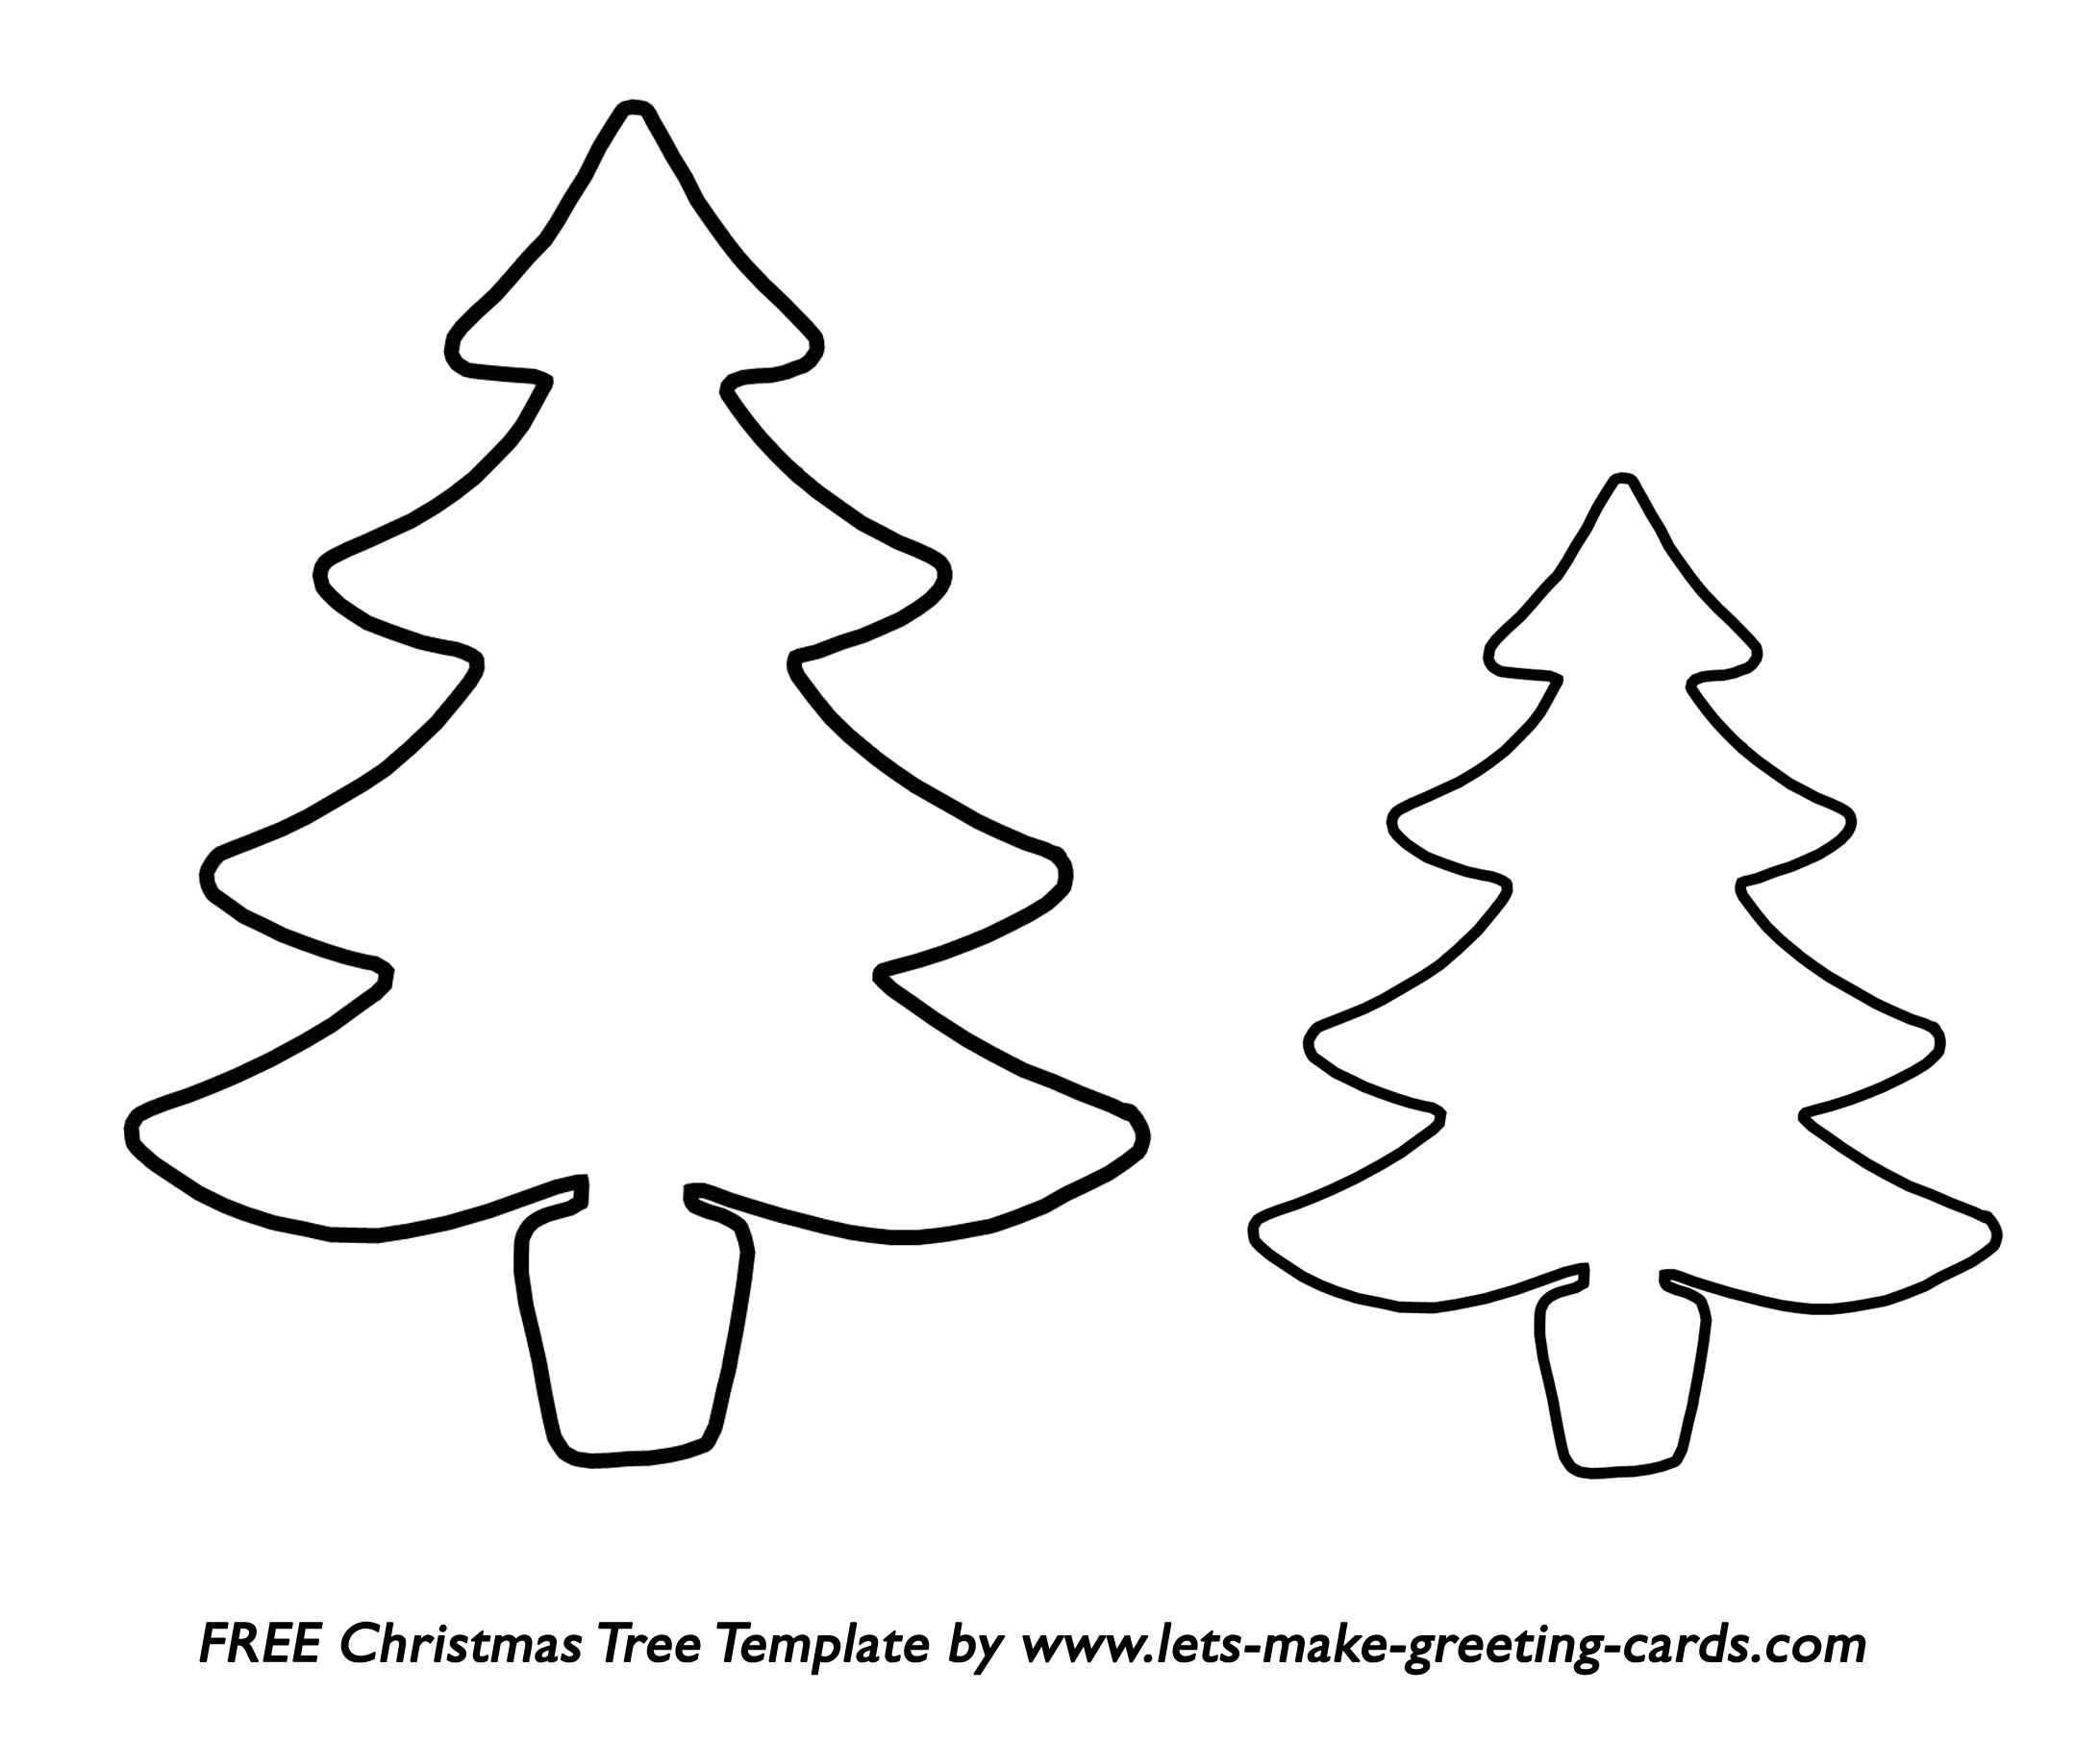 Christmas Tree Templates In All Shapes And Sizes - Free Printable Christmas Tree Template